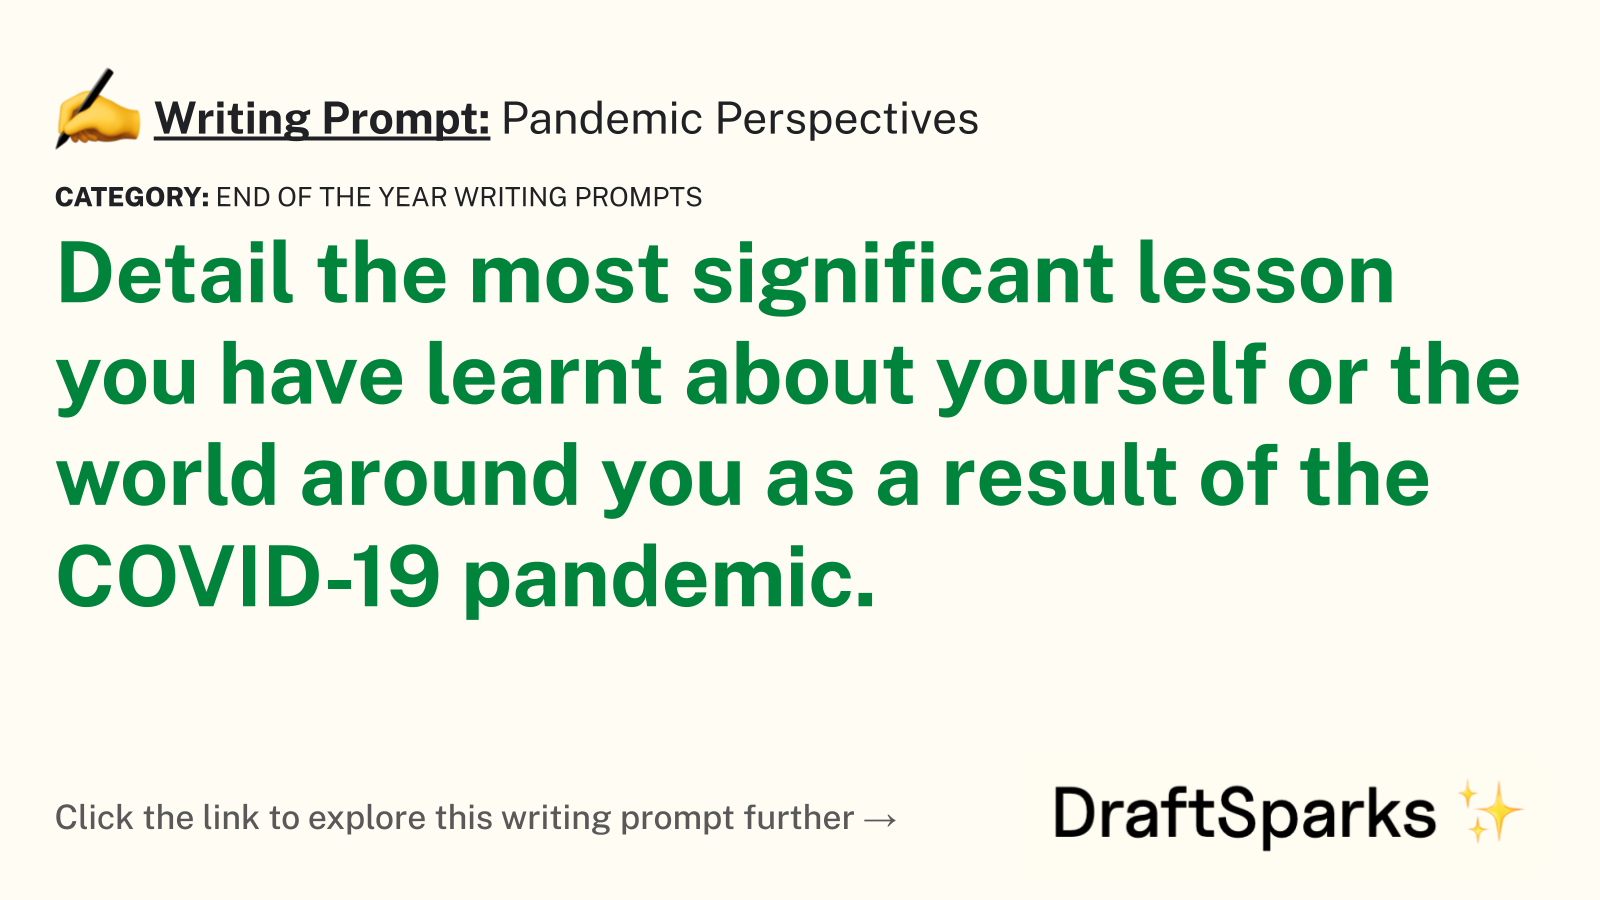 Pandemic Perspectives